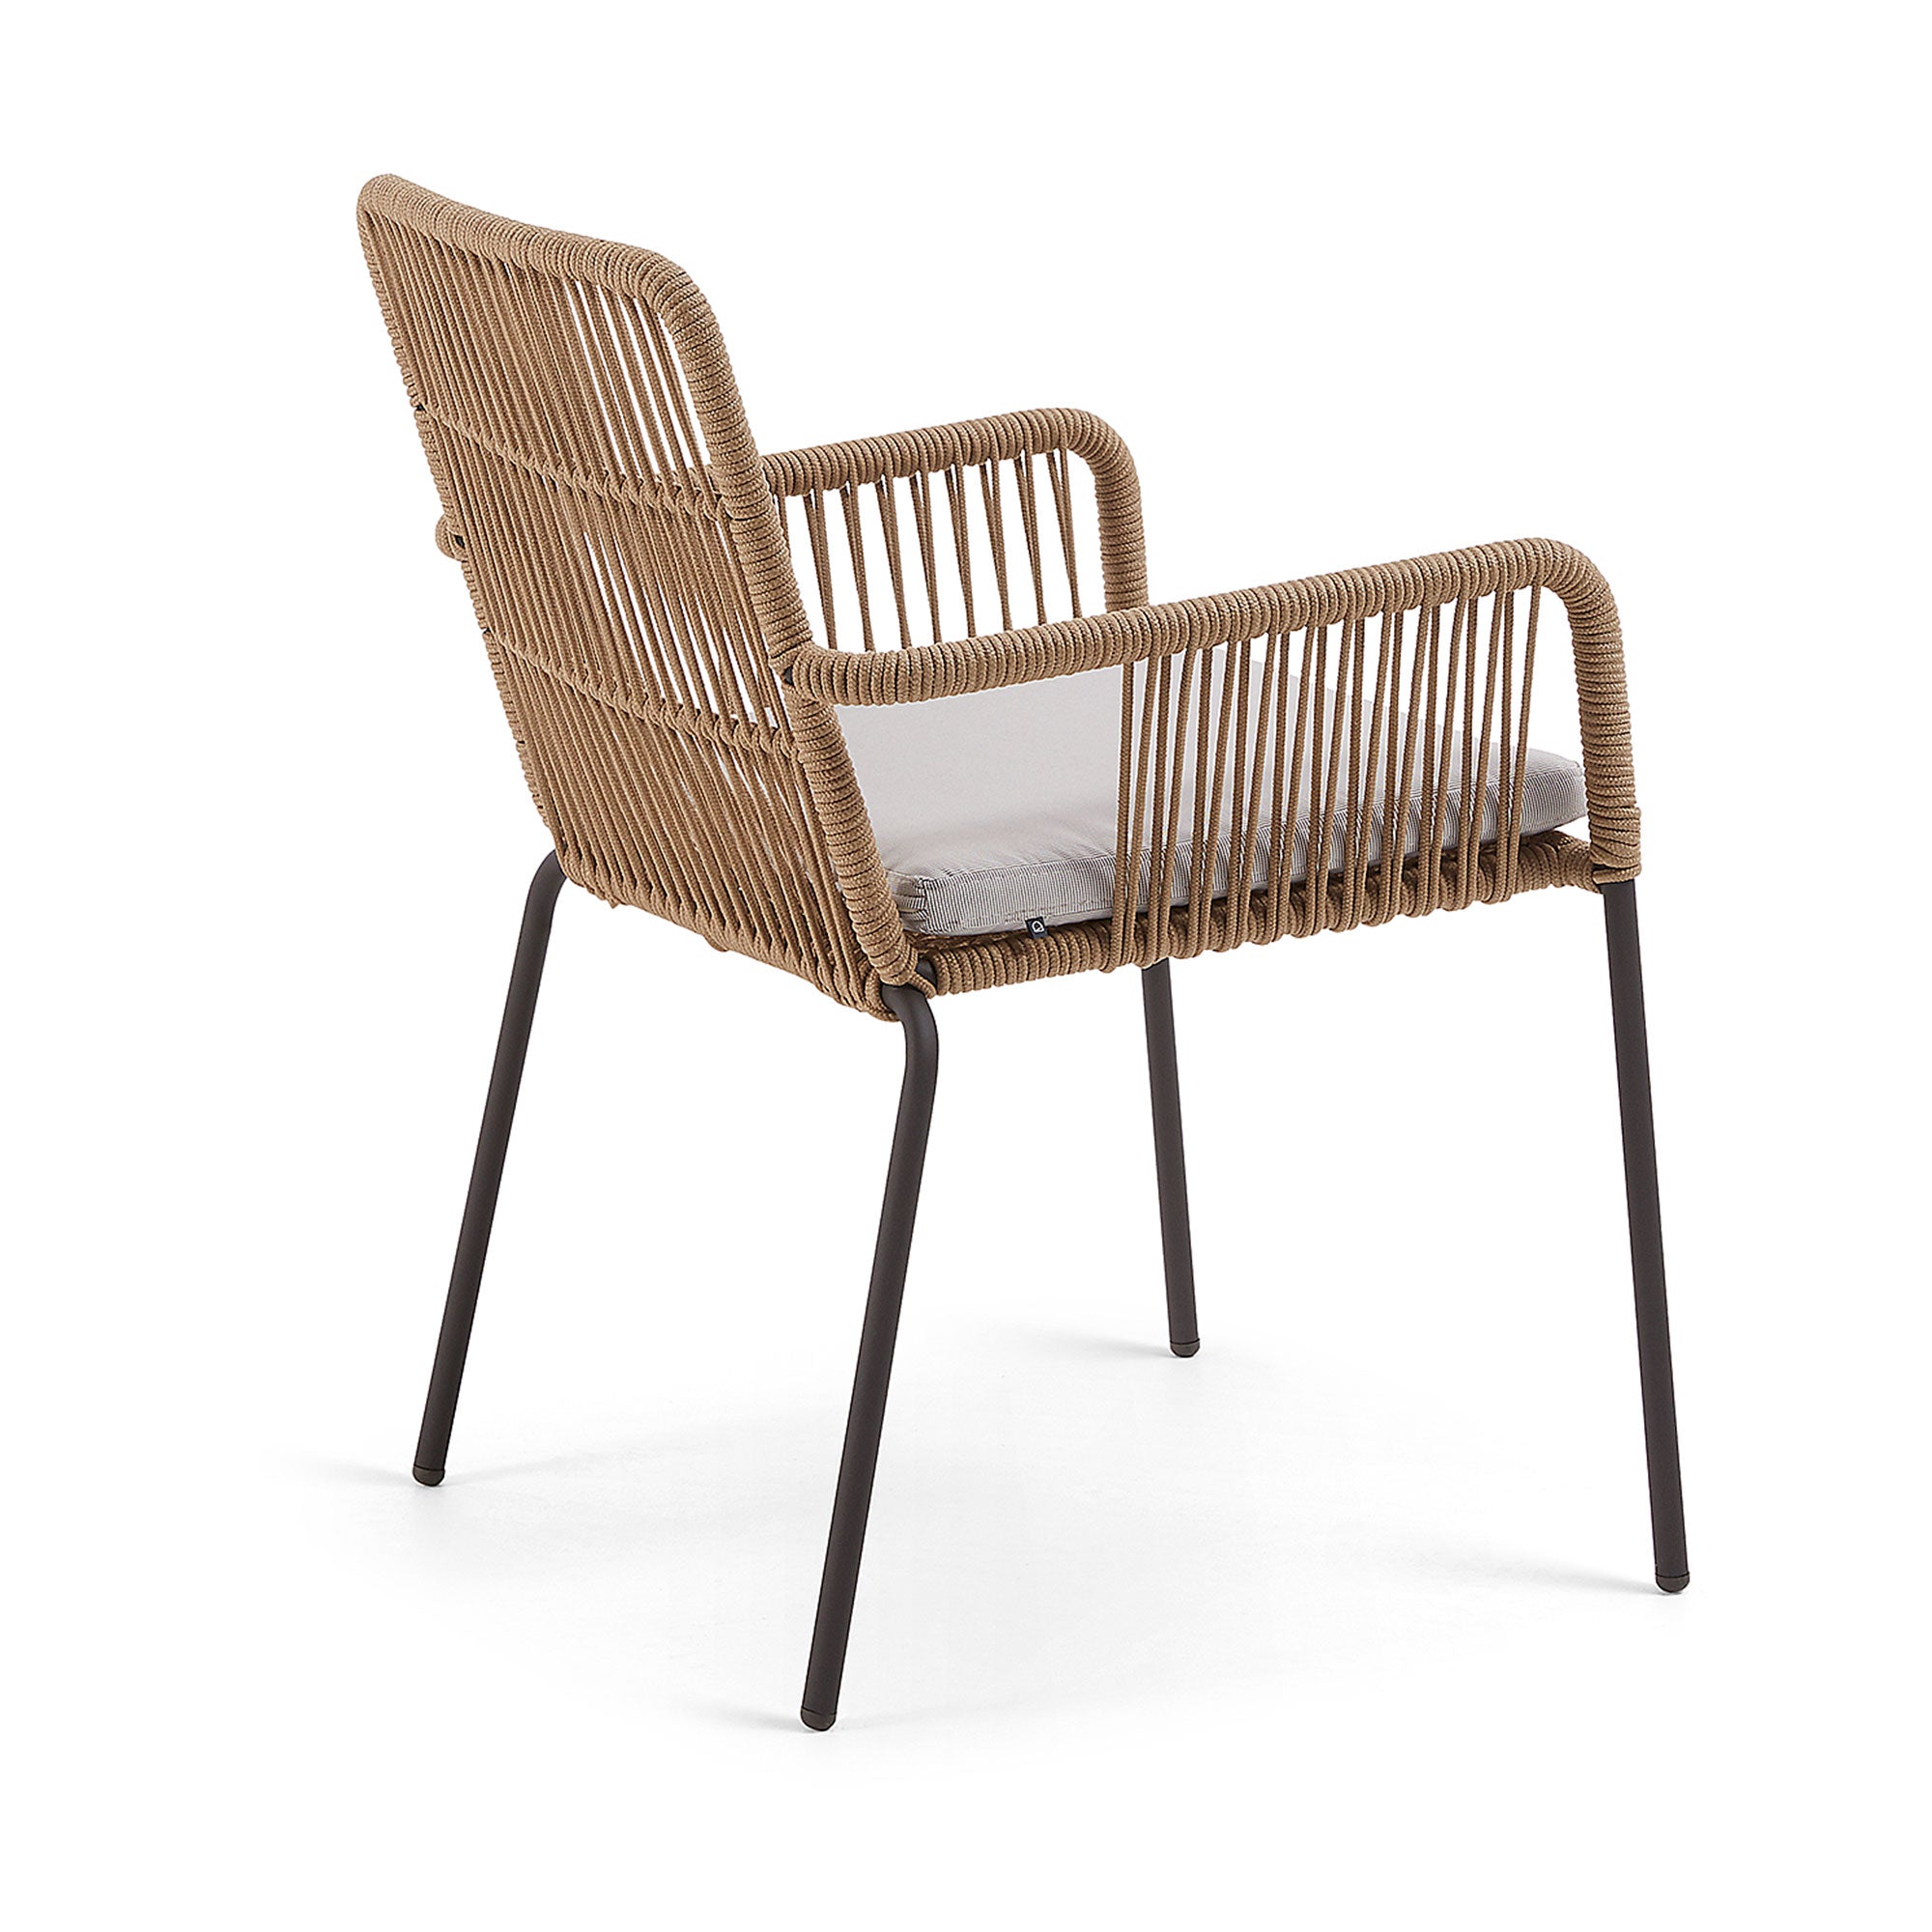 Samanta stackable chair made from beige cord and galvanised steel legs.